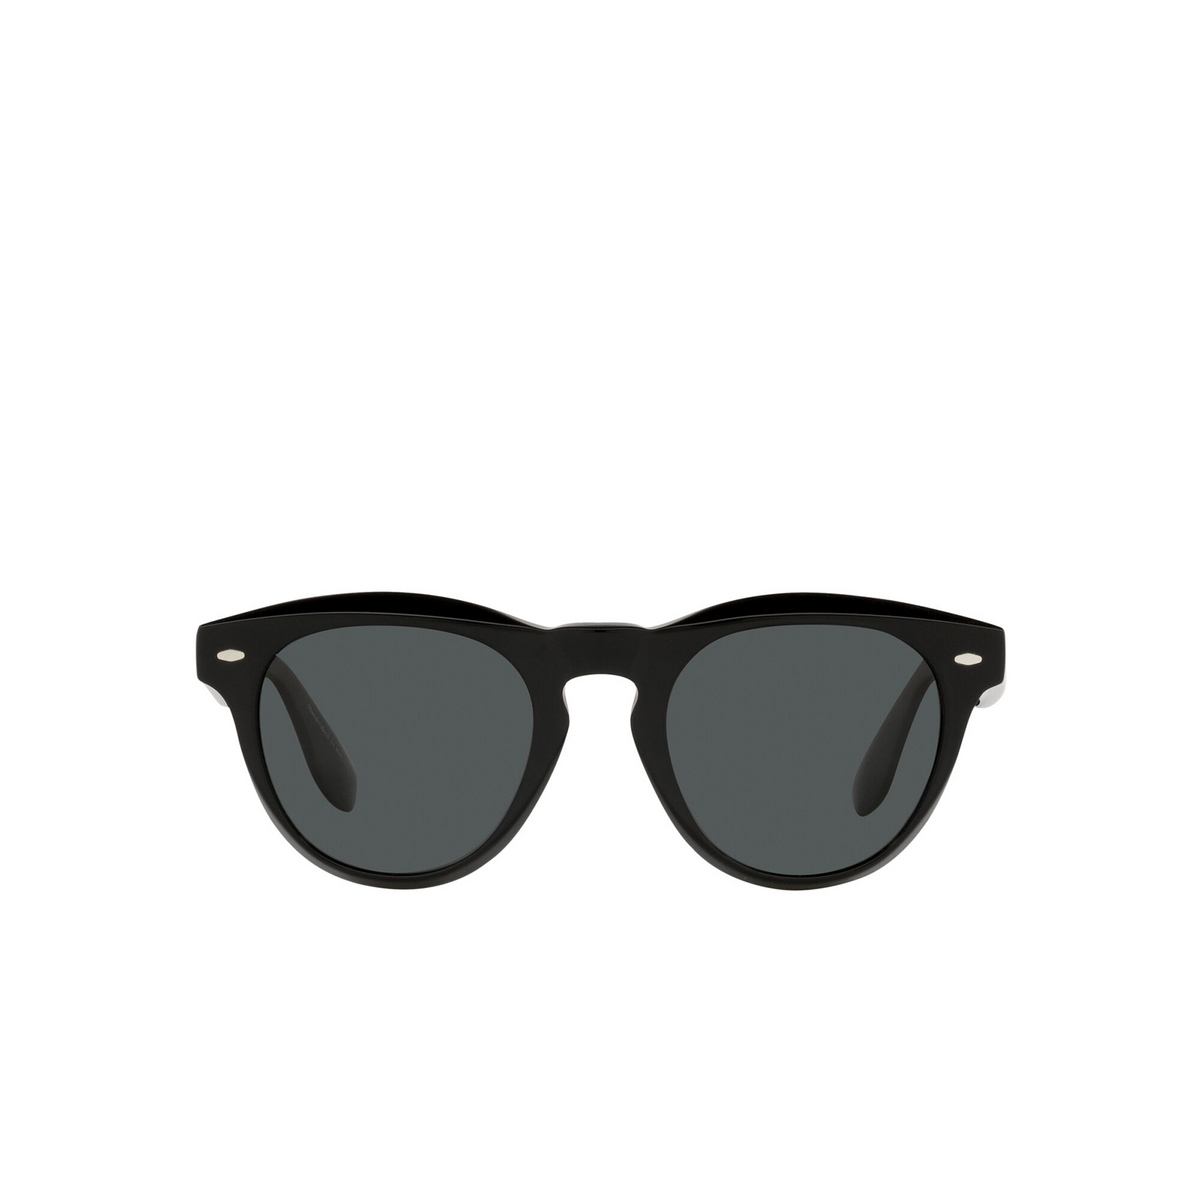 Oliver Peoples NINO Sunglasses 1005P2 Black - front view